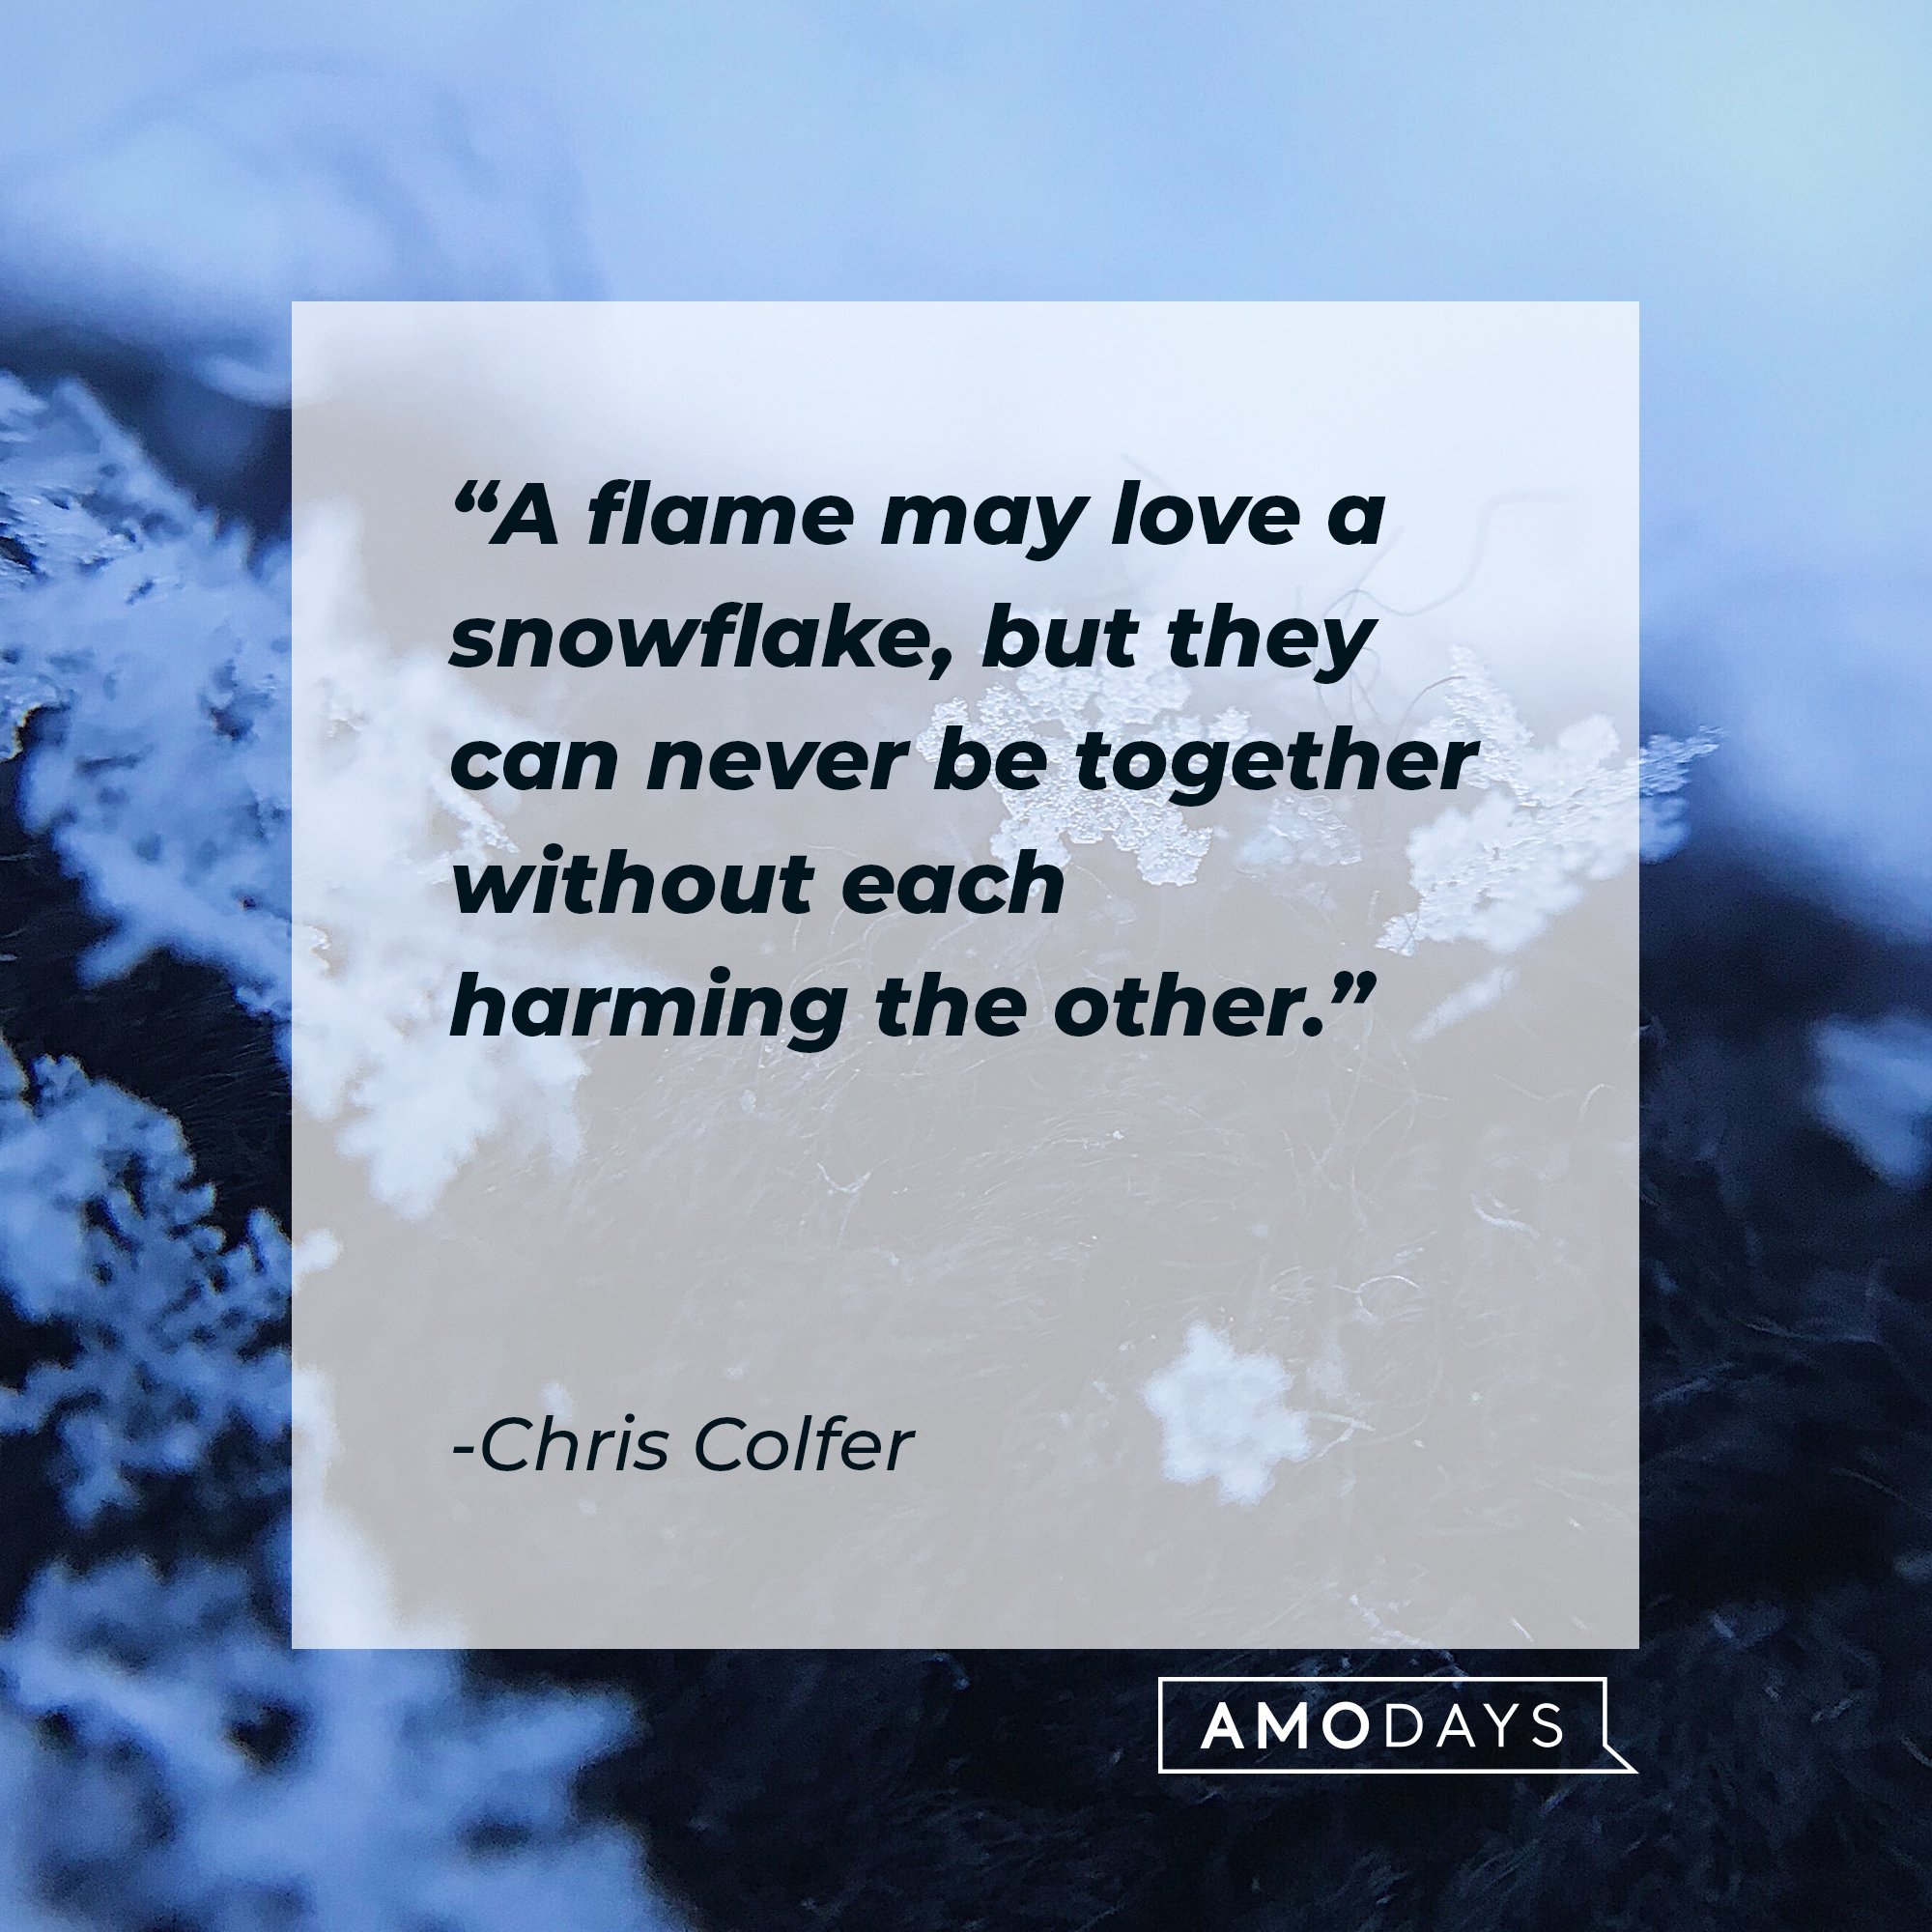 Chris Colfer’s quote: "A flame may love a snowflake, but they can never be together without each harming the other." | Image: AmoDays